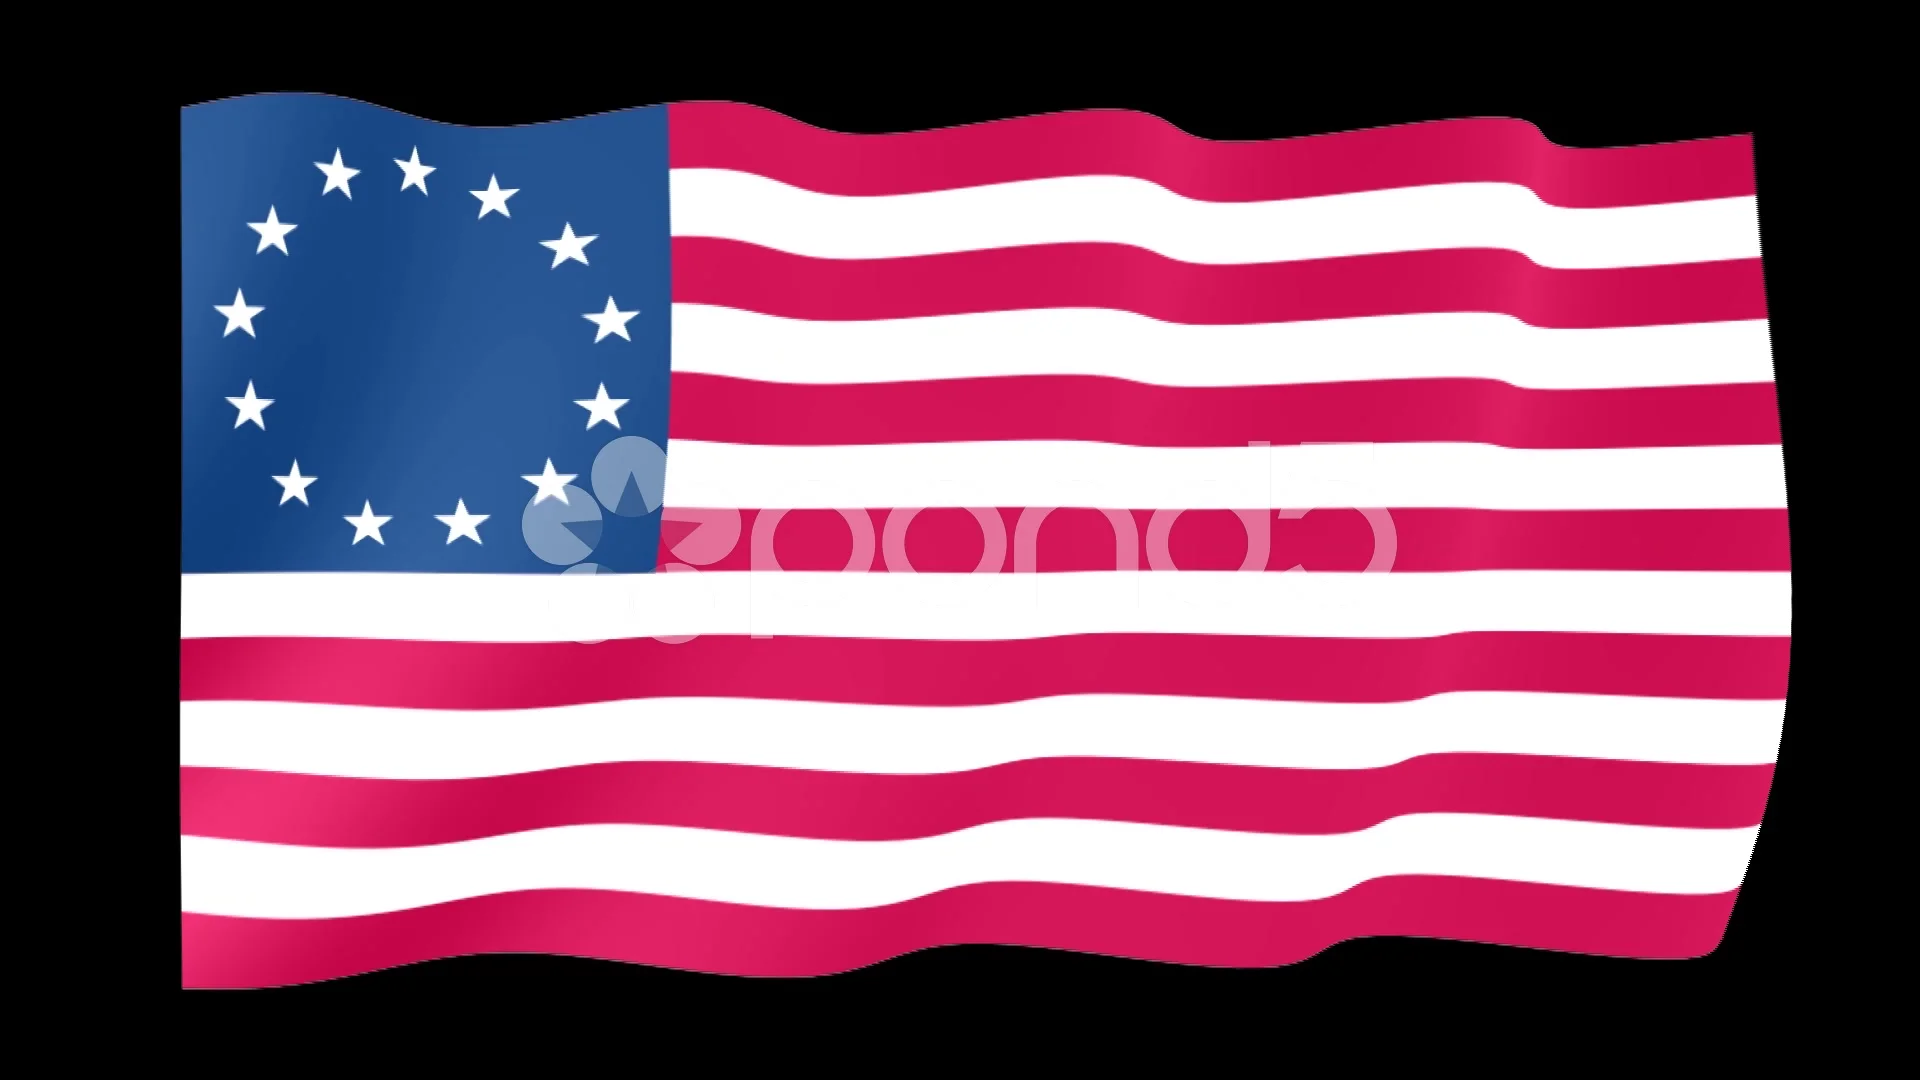 Betsy Ross Flag 3D Waving Flag Design the National Symbol of USA 3D  Rendering USA 3D Waving Sign Design Stock Illustration  Illustration of  america holiday 139285427